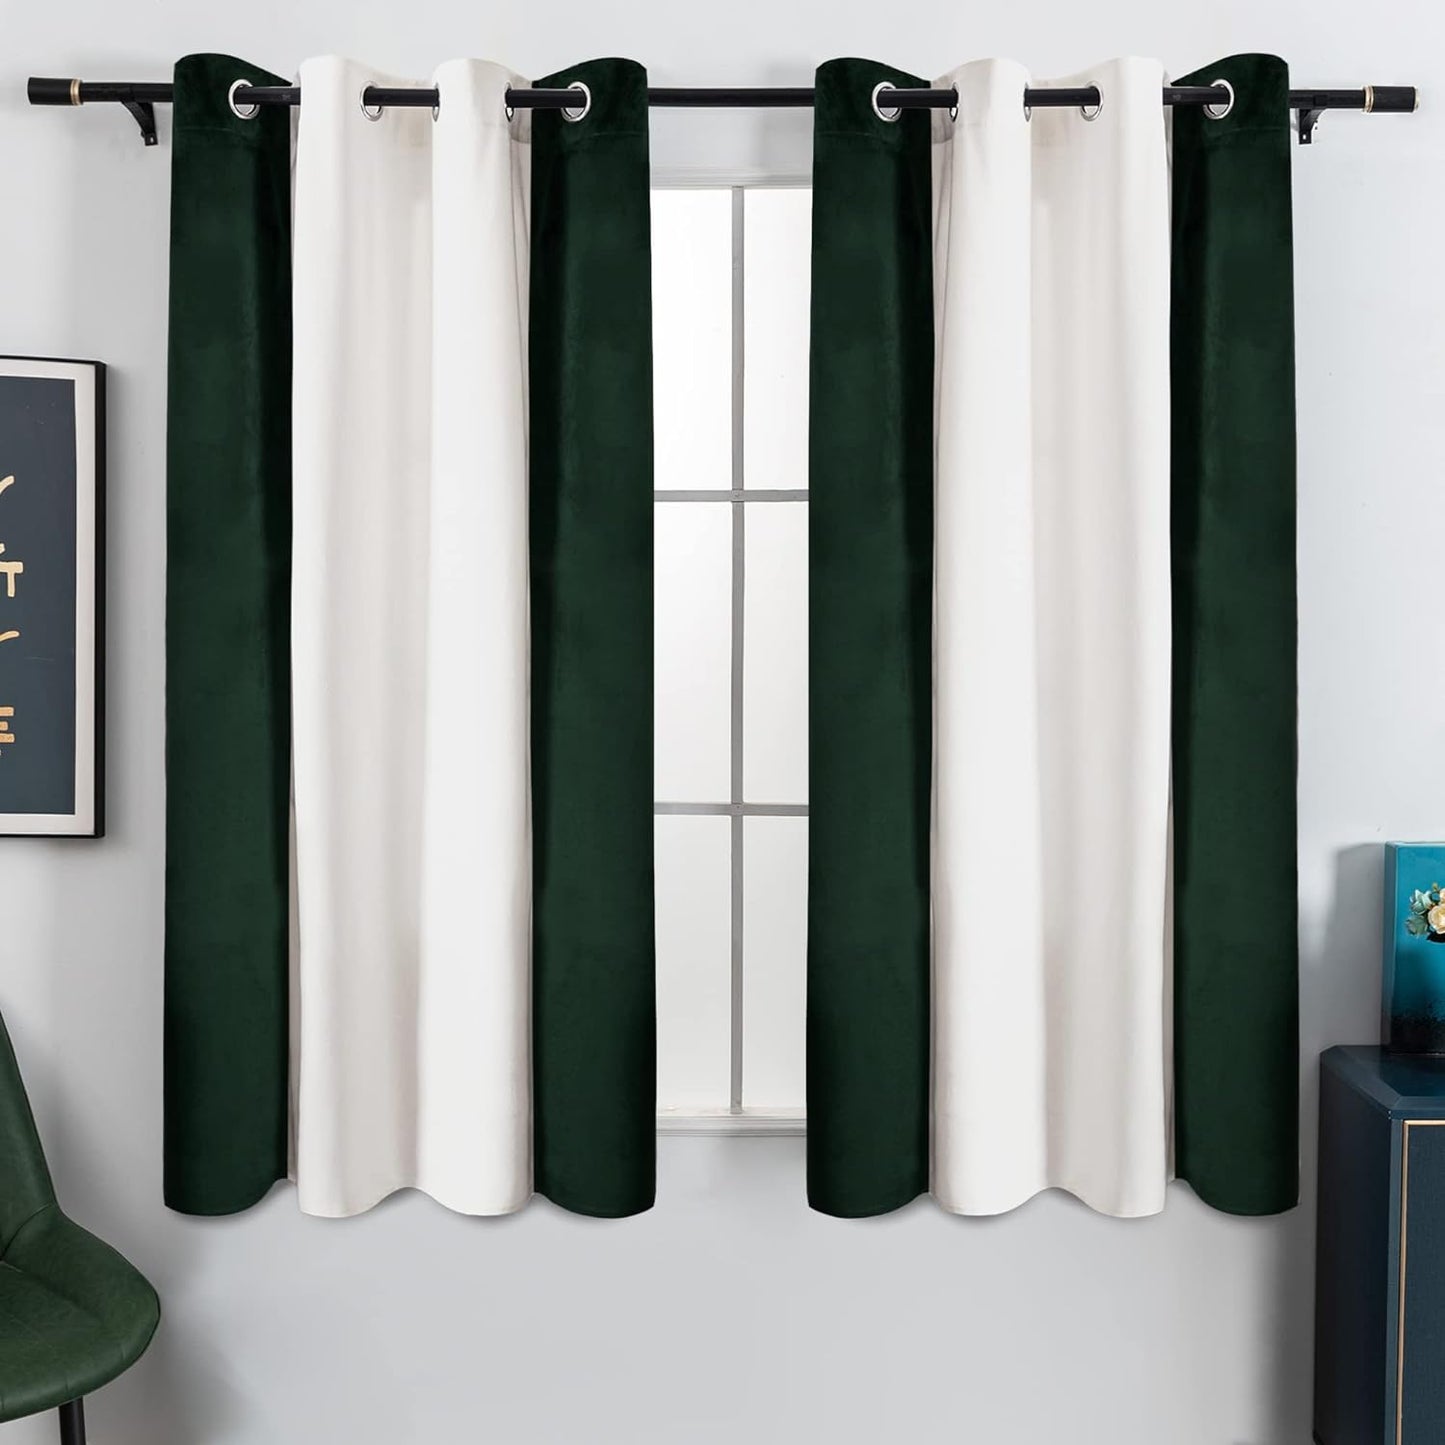 Victree Color Block Velvet Curtains for Bedroom, Patchwork Blackout Curtains 52 X 84 Inch Length - Room Darkening Sun Light Blocking Grommet Window Drapes for Living Room, 2 Panels, Black and White  Victree Dark Green/White 52 X 63 Inches 